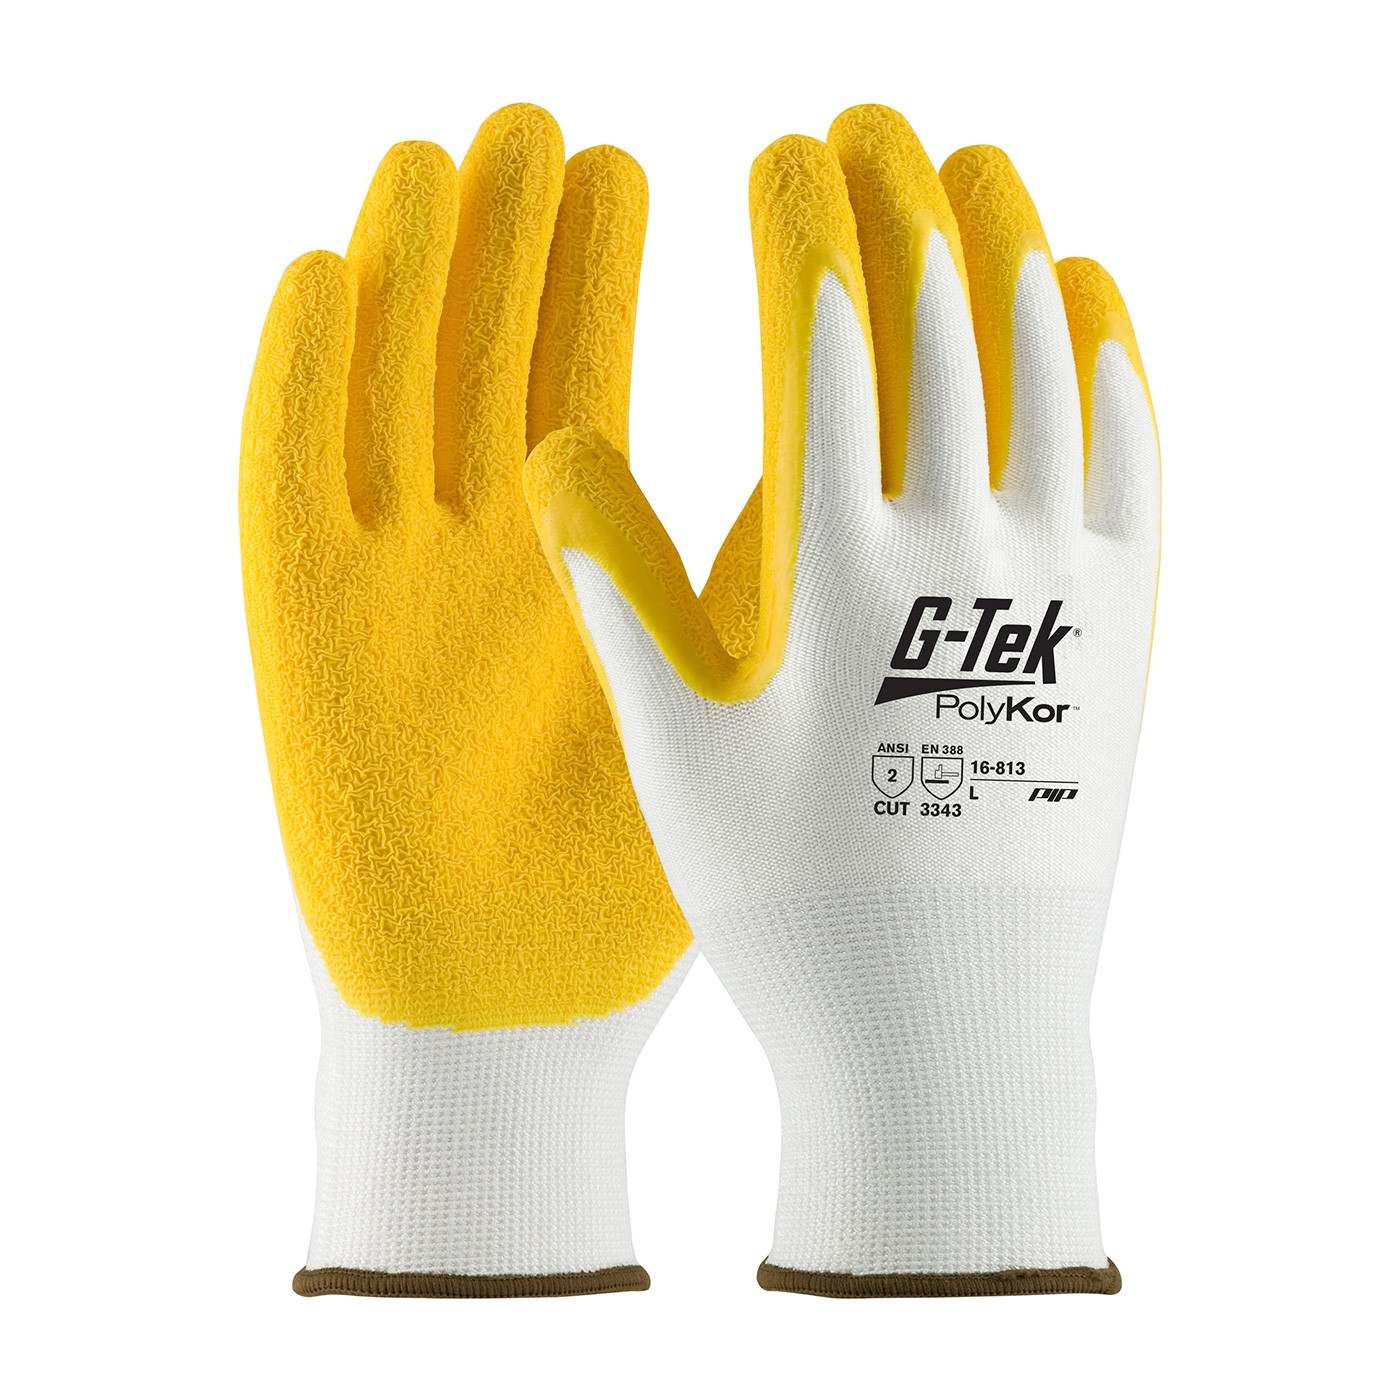 G-Tek® PolyKor® Seamless Knit PolyKor® Blended Glove with Latex Coated Crinkle Grip on Palm & Fingers  (#16-813)